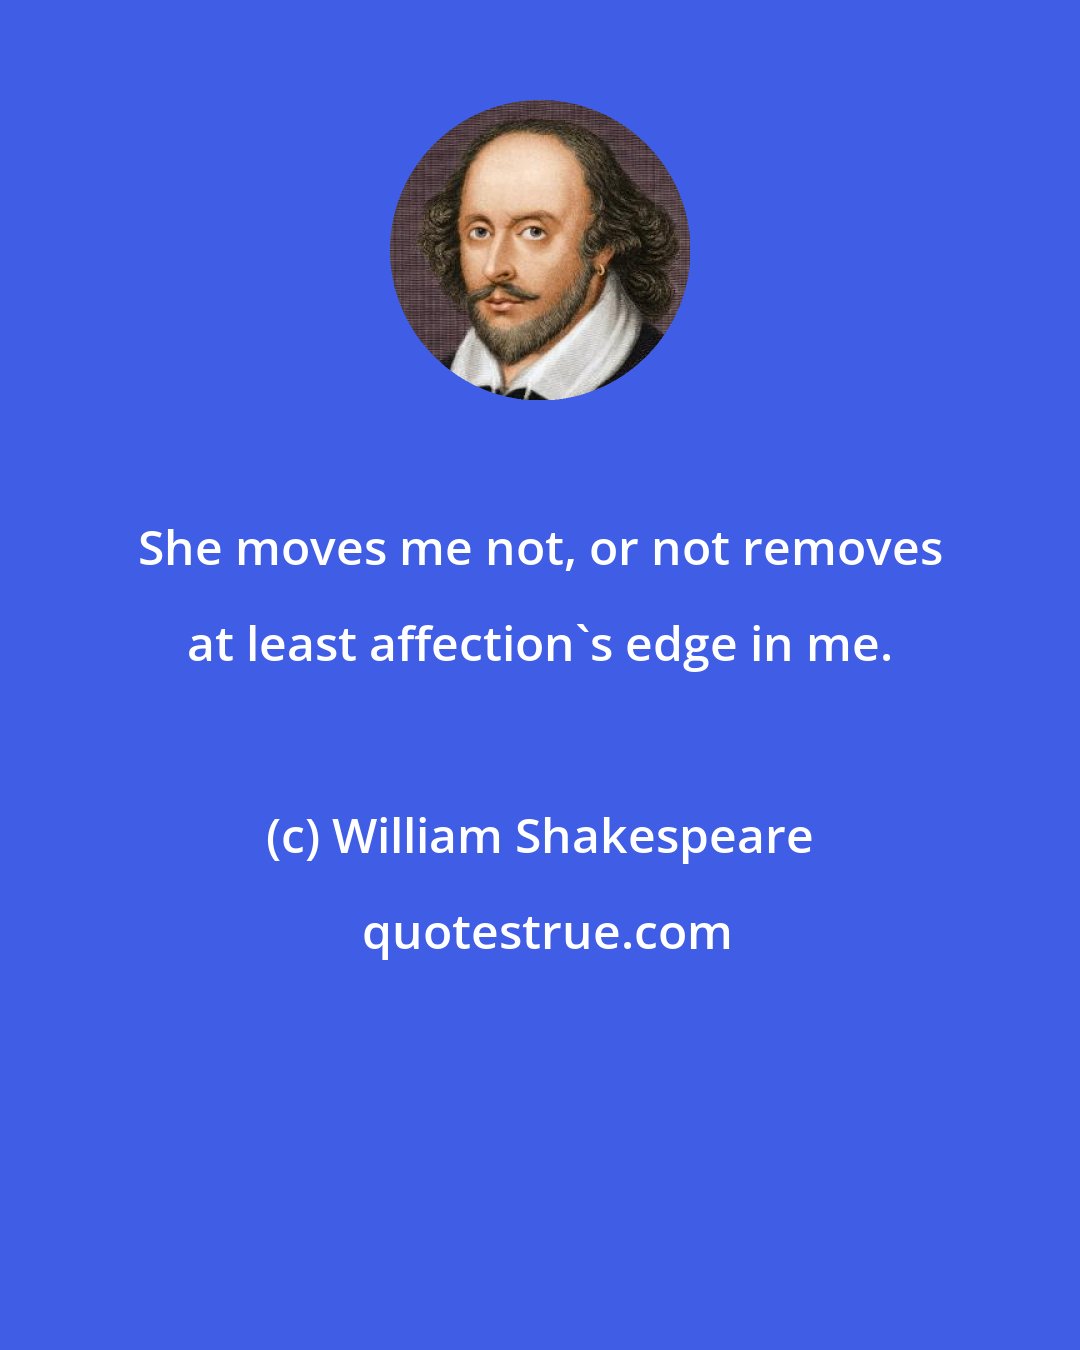 William Shakespeare: She moves me not, or not removes at least affection's edge in me.